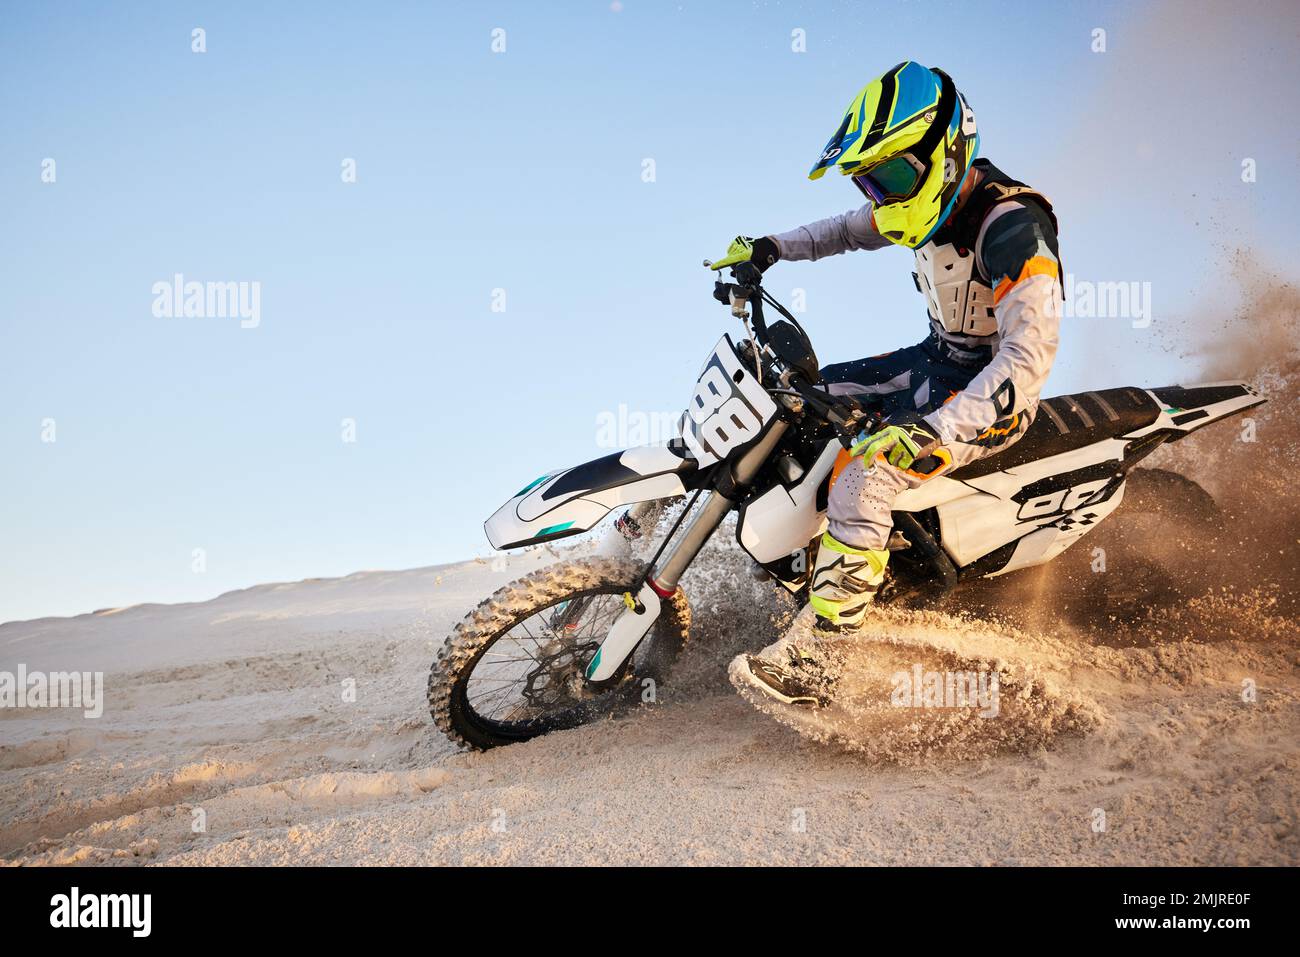 Desert, moto cross or sports adventure athlete in sand for exercise,  workout or speed. Travel, dirt and bike with energy of man in Dubai race on  dirt Stock Photo - Alamy